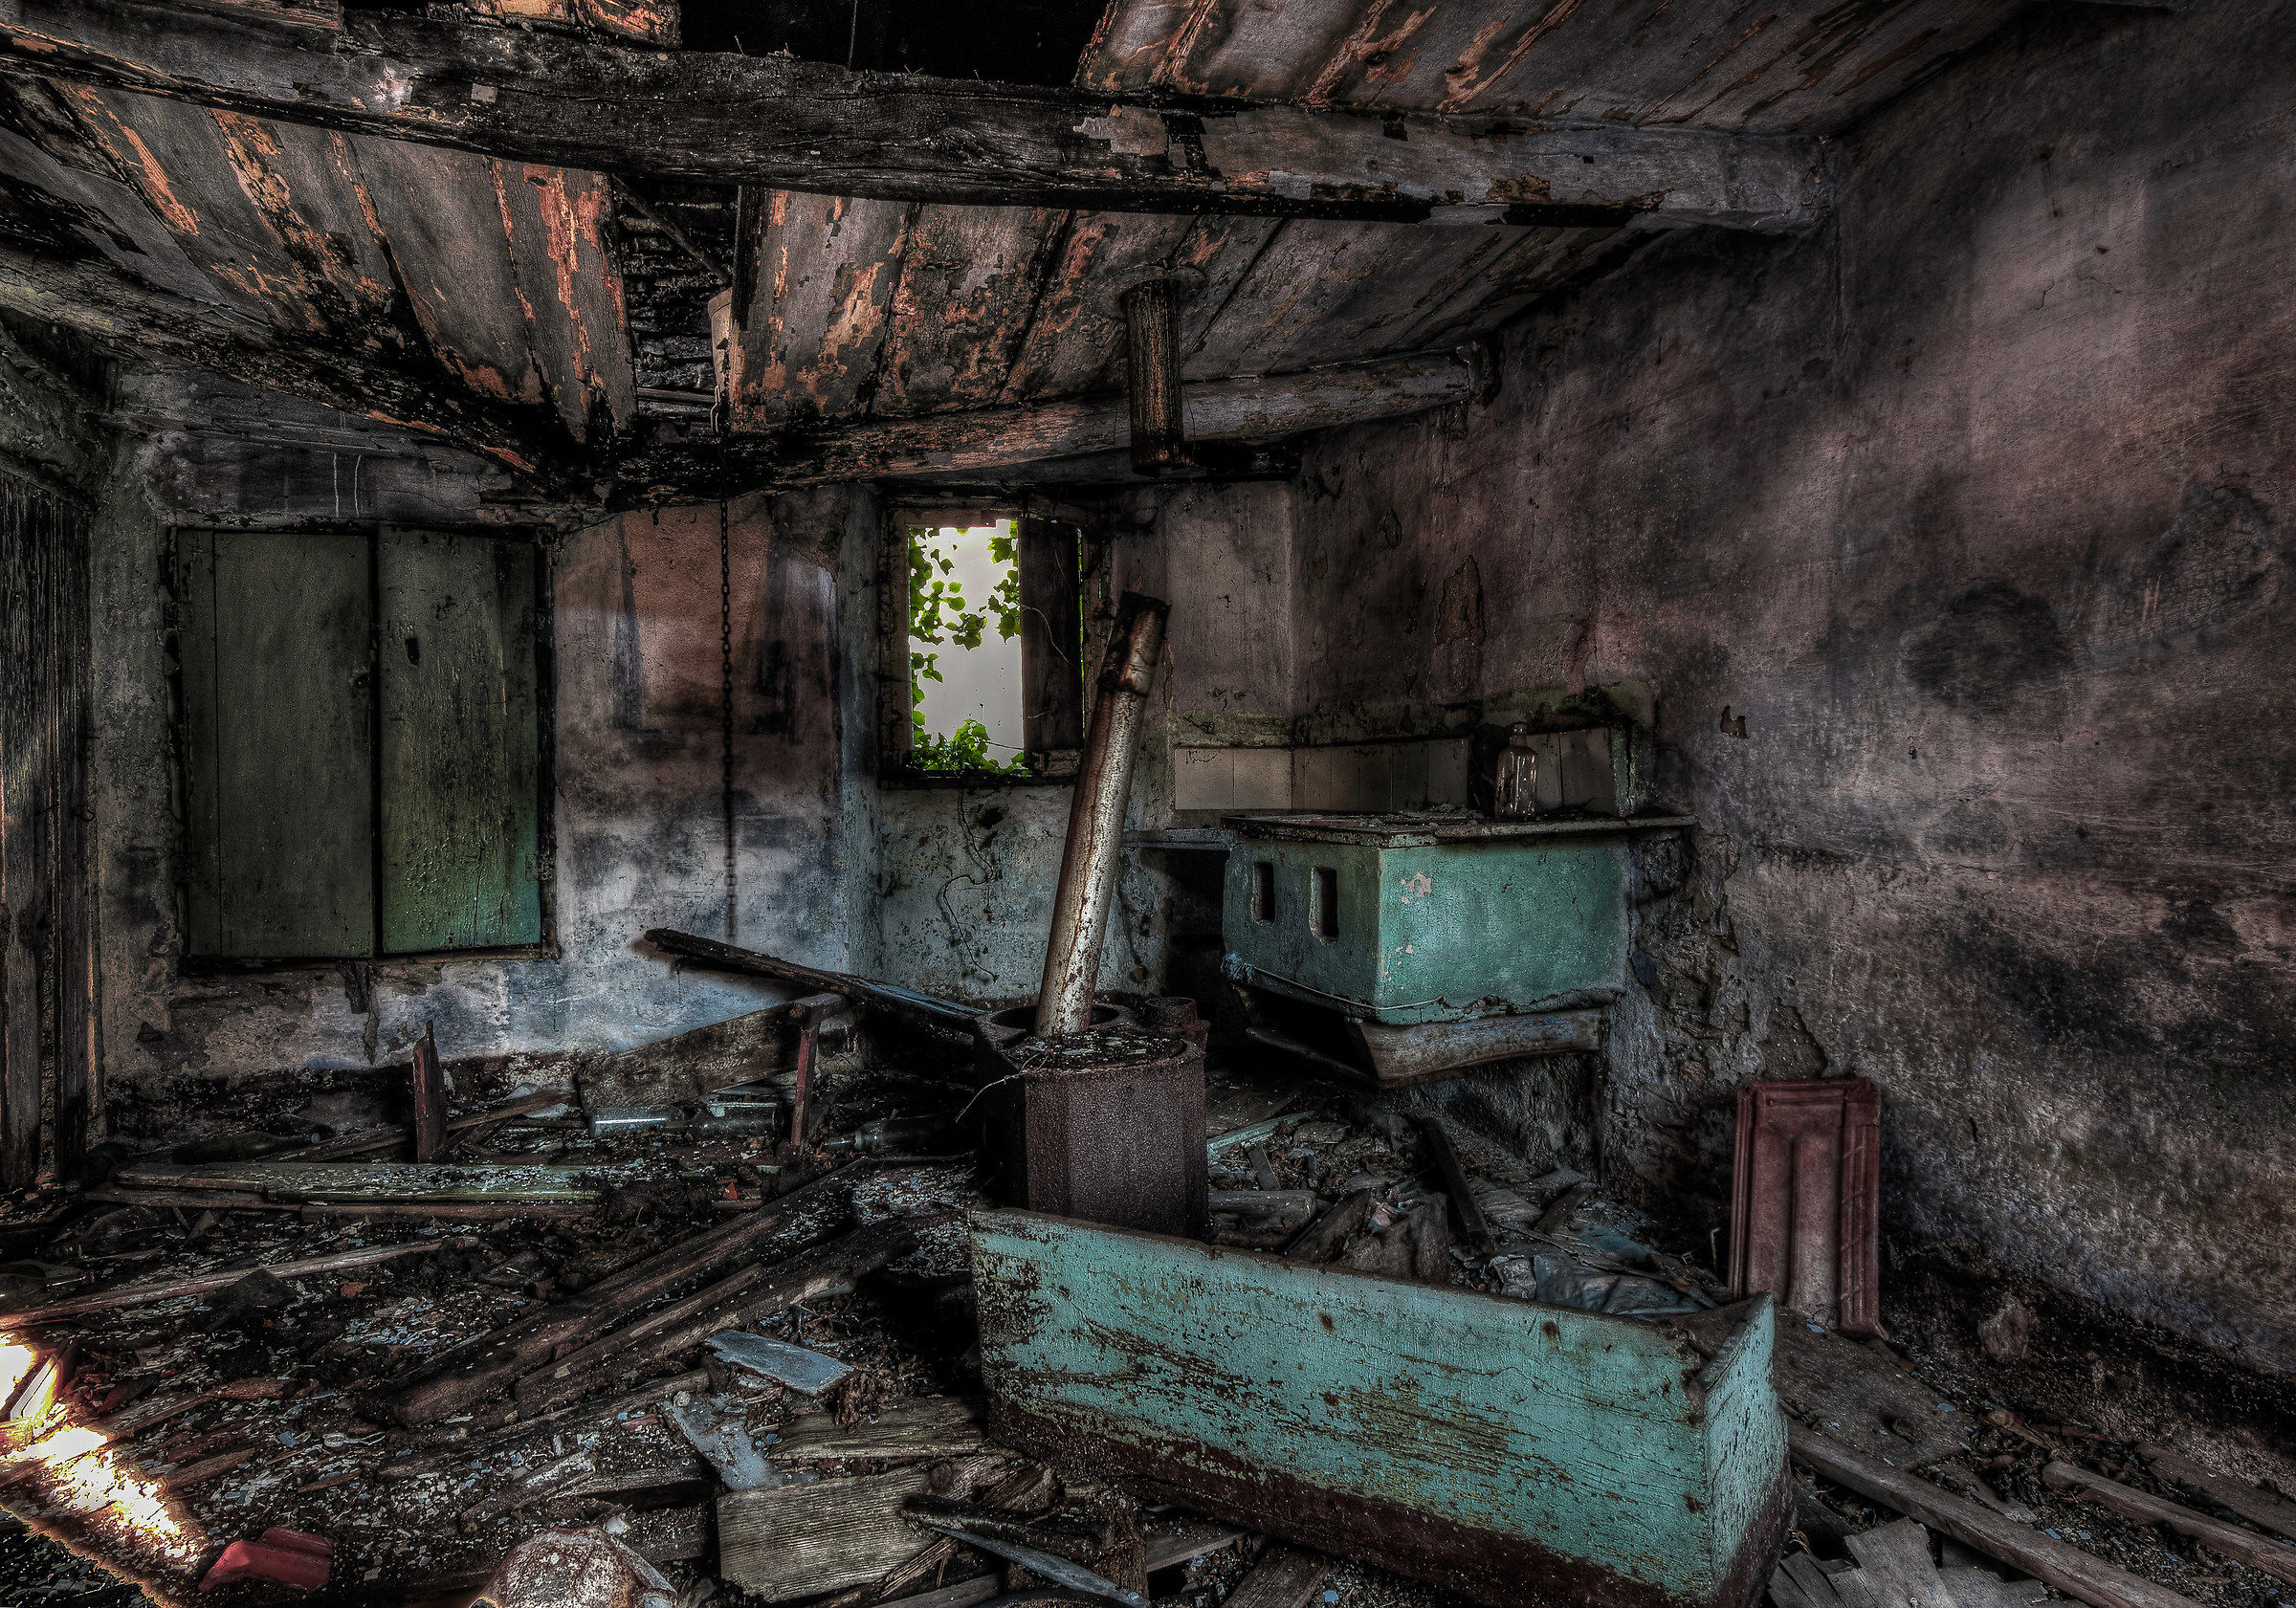 Buse '(Ge) abandoned village ... the room heater...